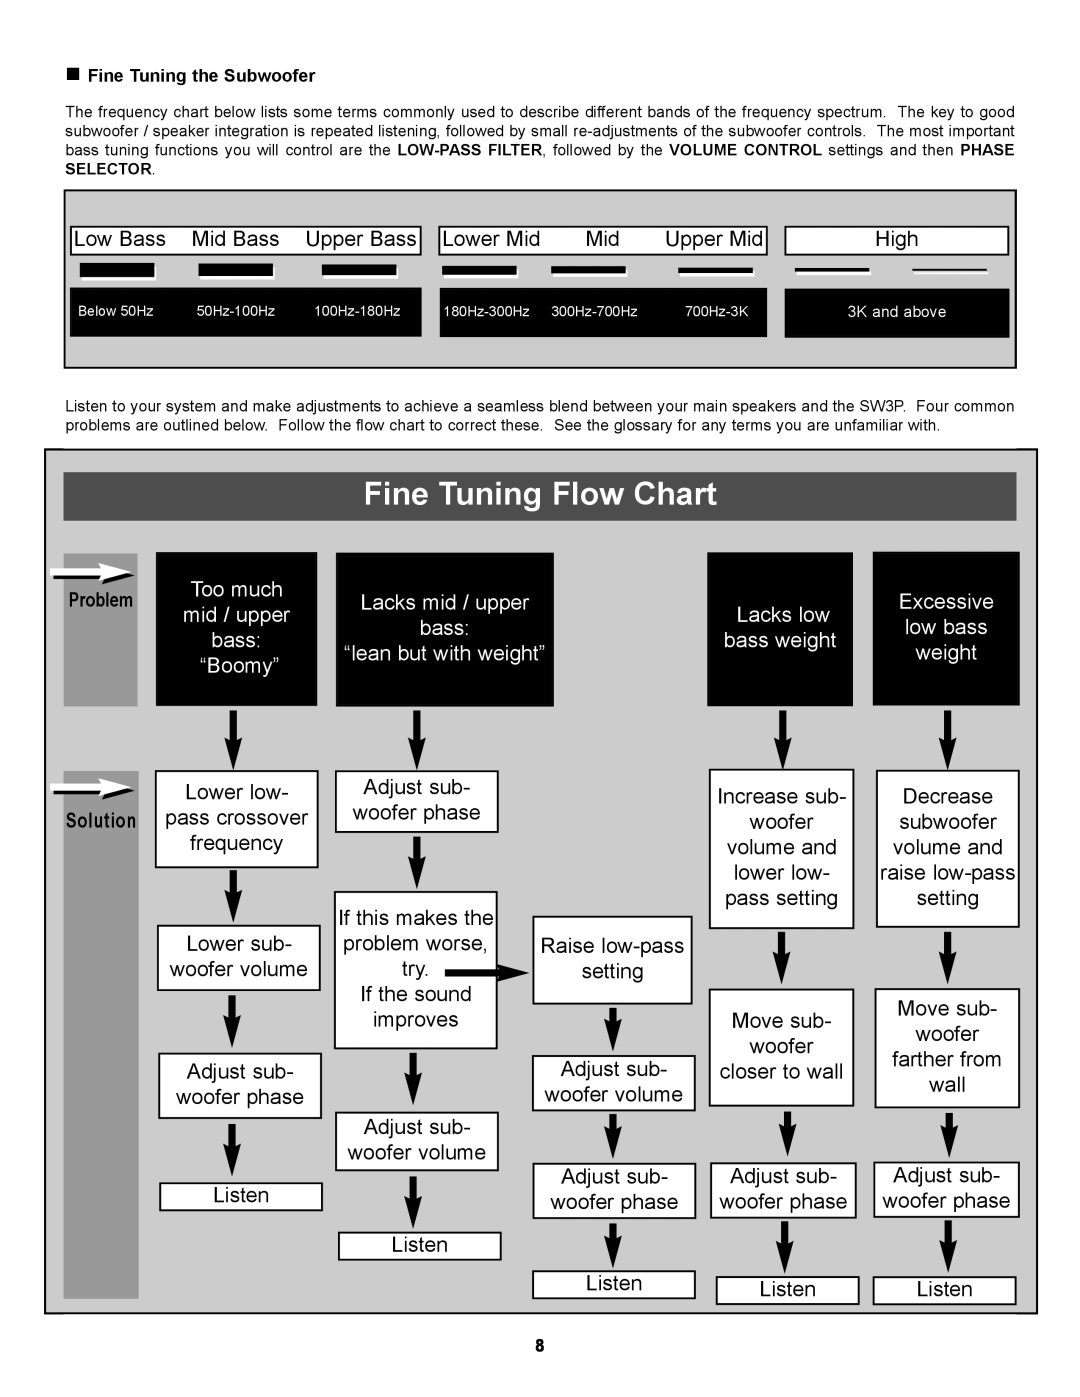 NHT SA-3 owner manual Fine Tuning Flow Chart, Solution 